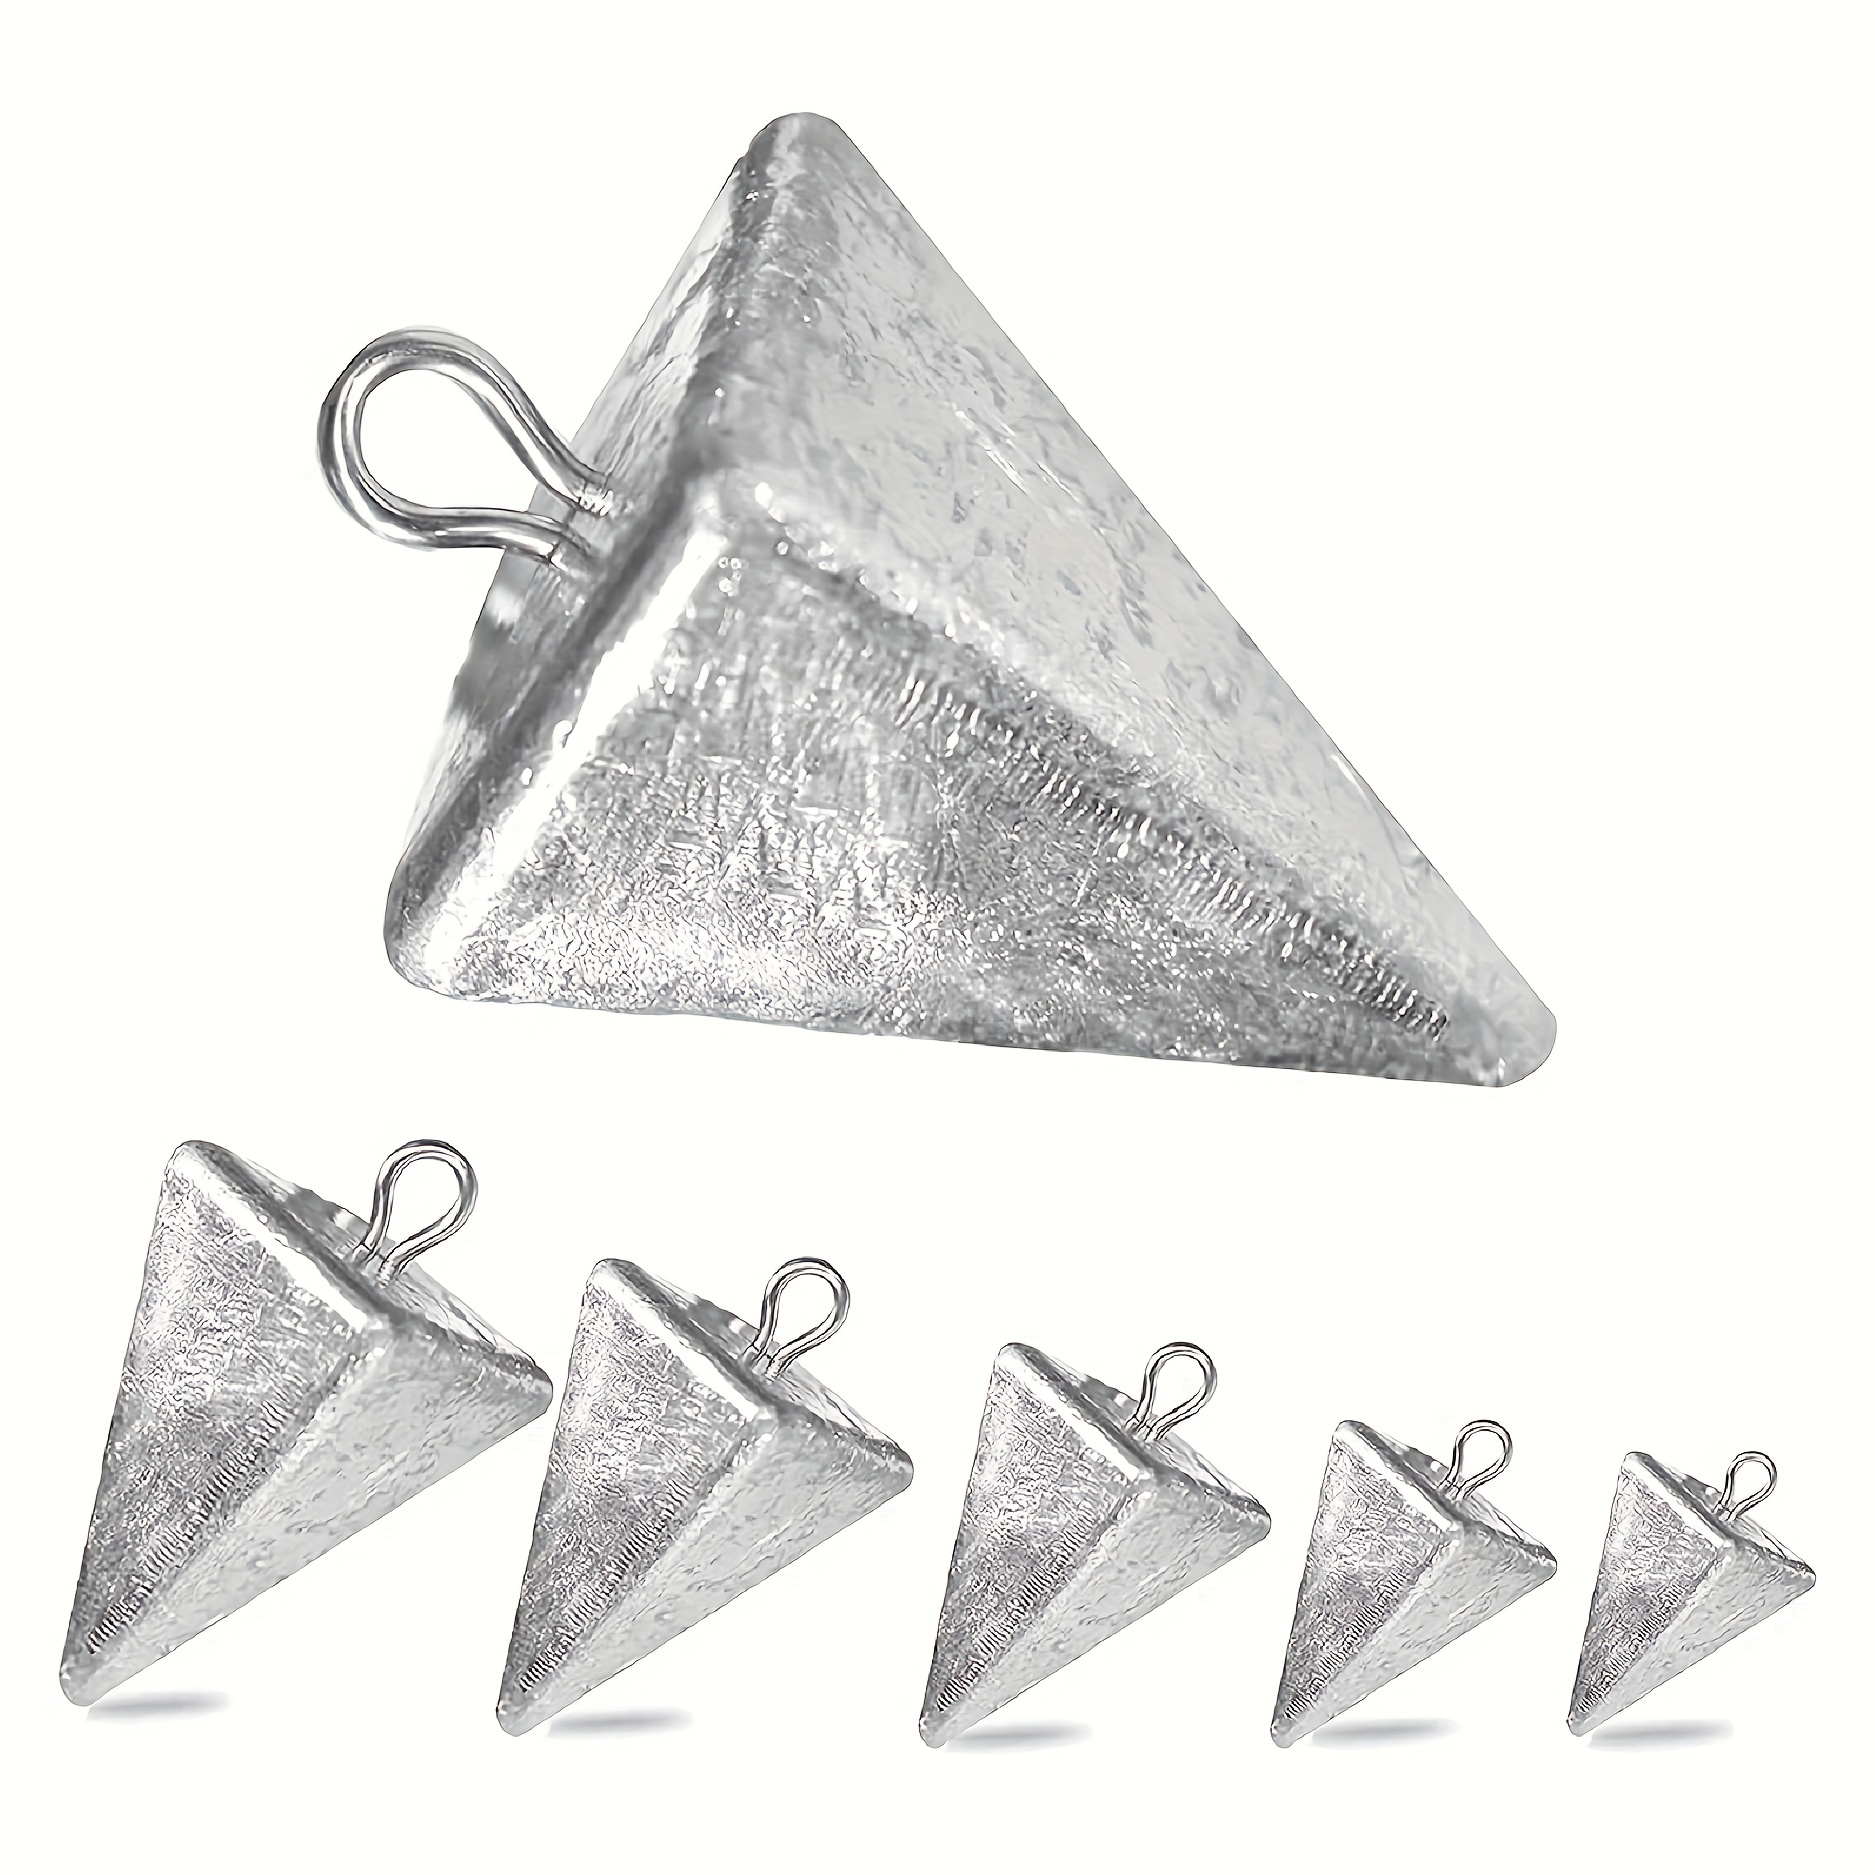 Lead Pyramid Fishing Weights, 1-6oz Surf Fishing Sinker For Saltwater  Freshwater